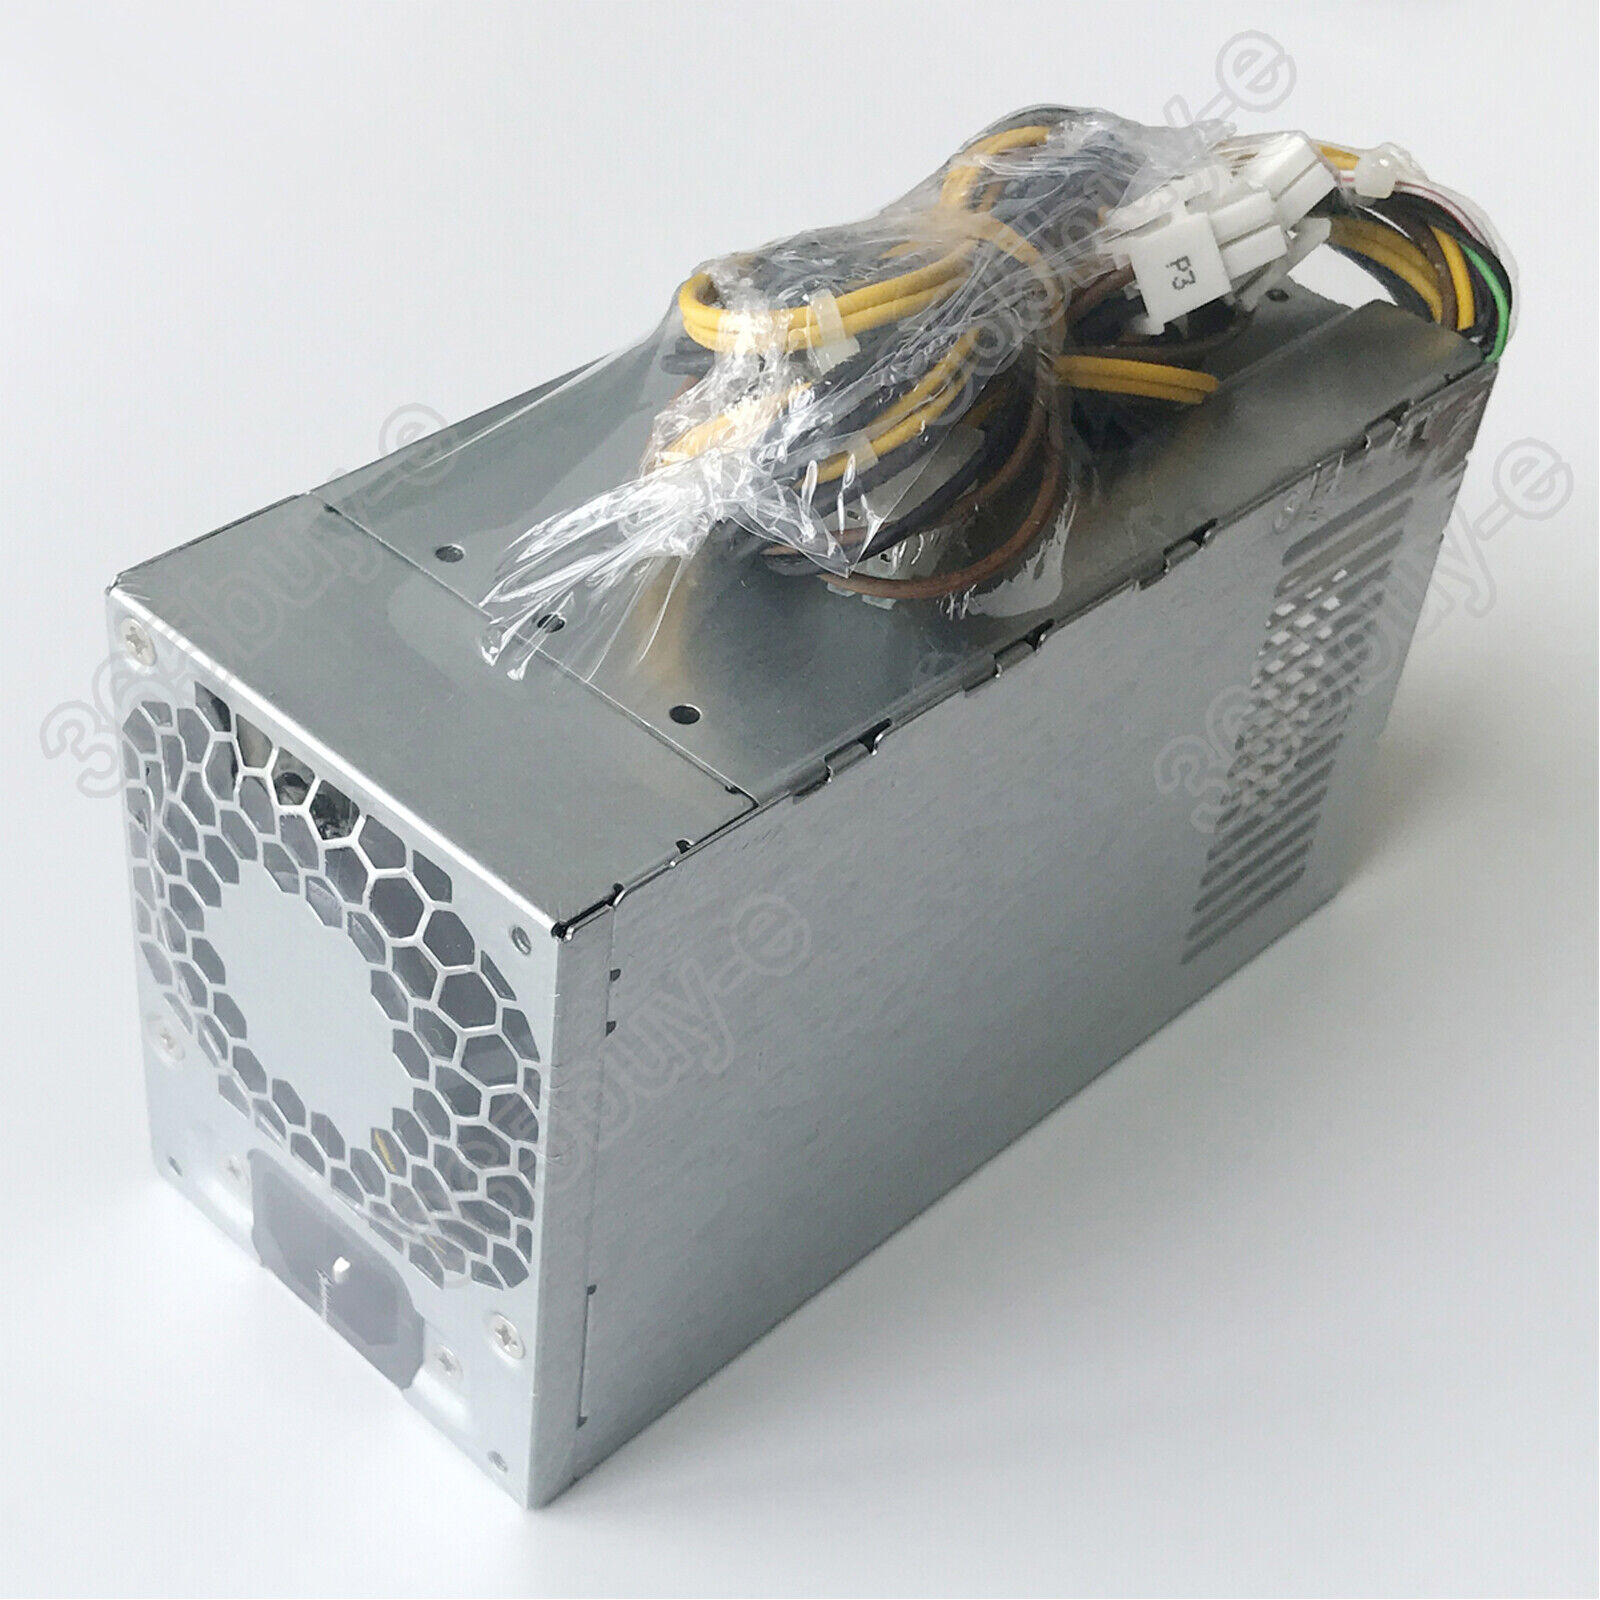 New For HP  400W 280 288 480 600 800 G3 G4 Power Supply PA-3401-1HA 942332-001